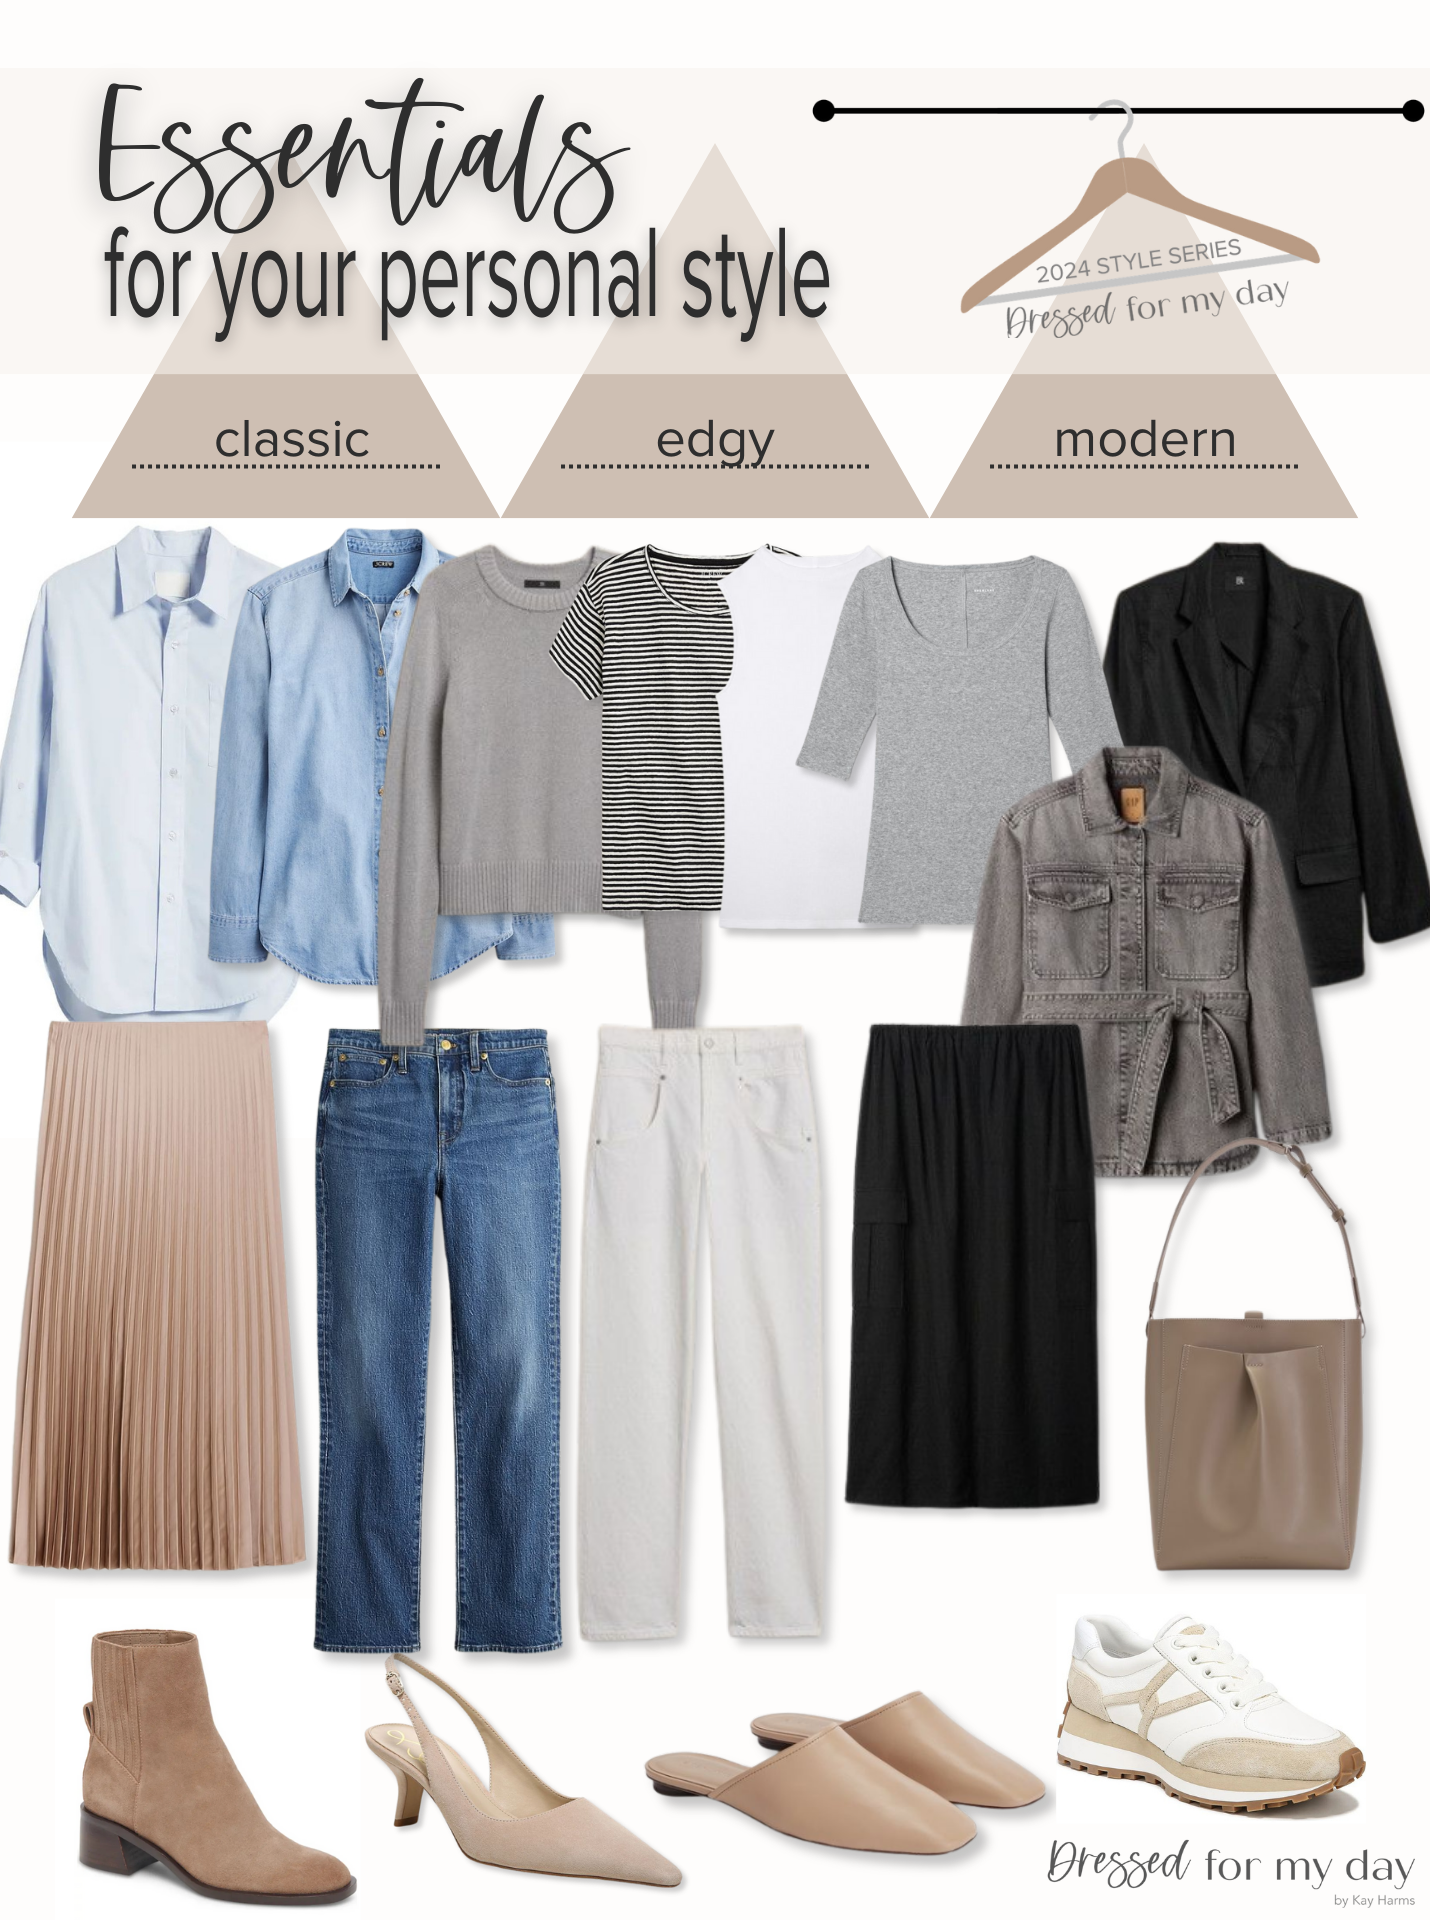 Essentials for Personal Styles 1 (7)